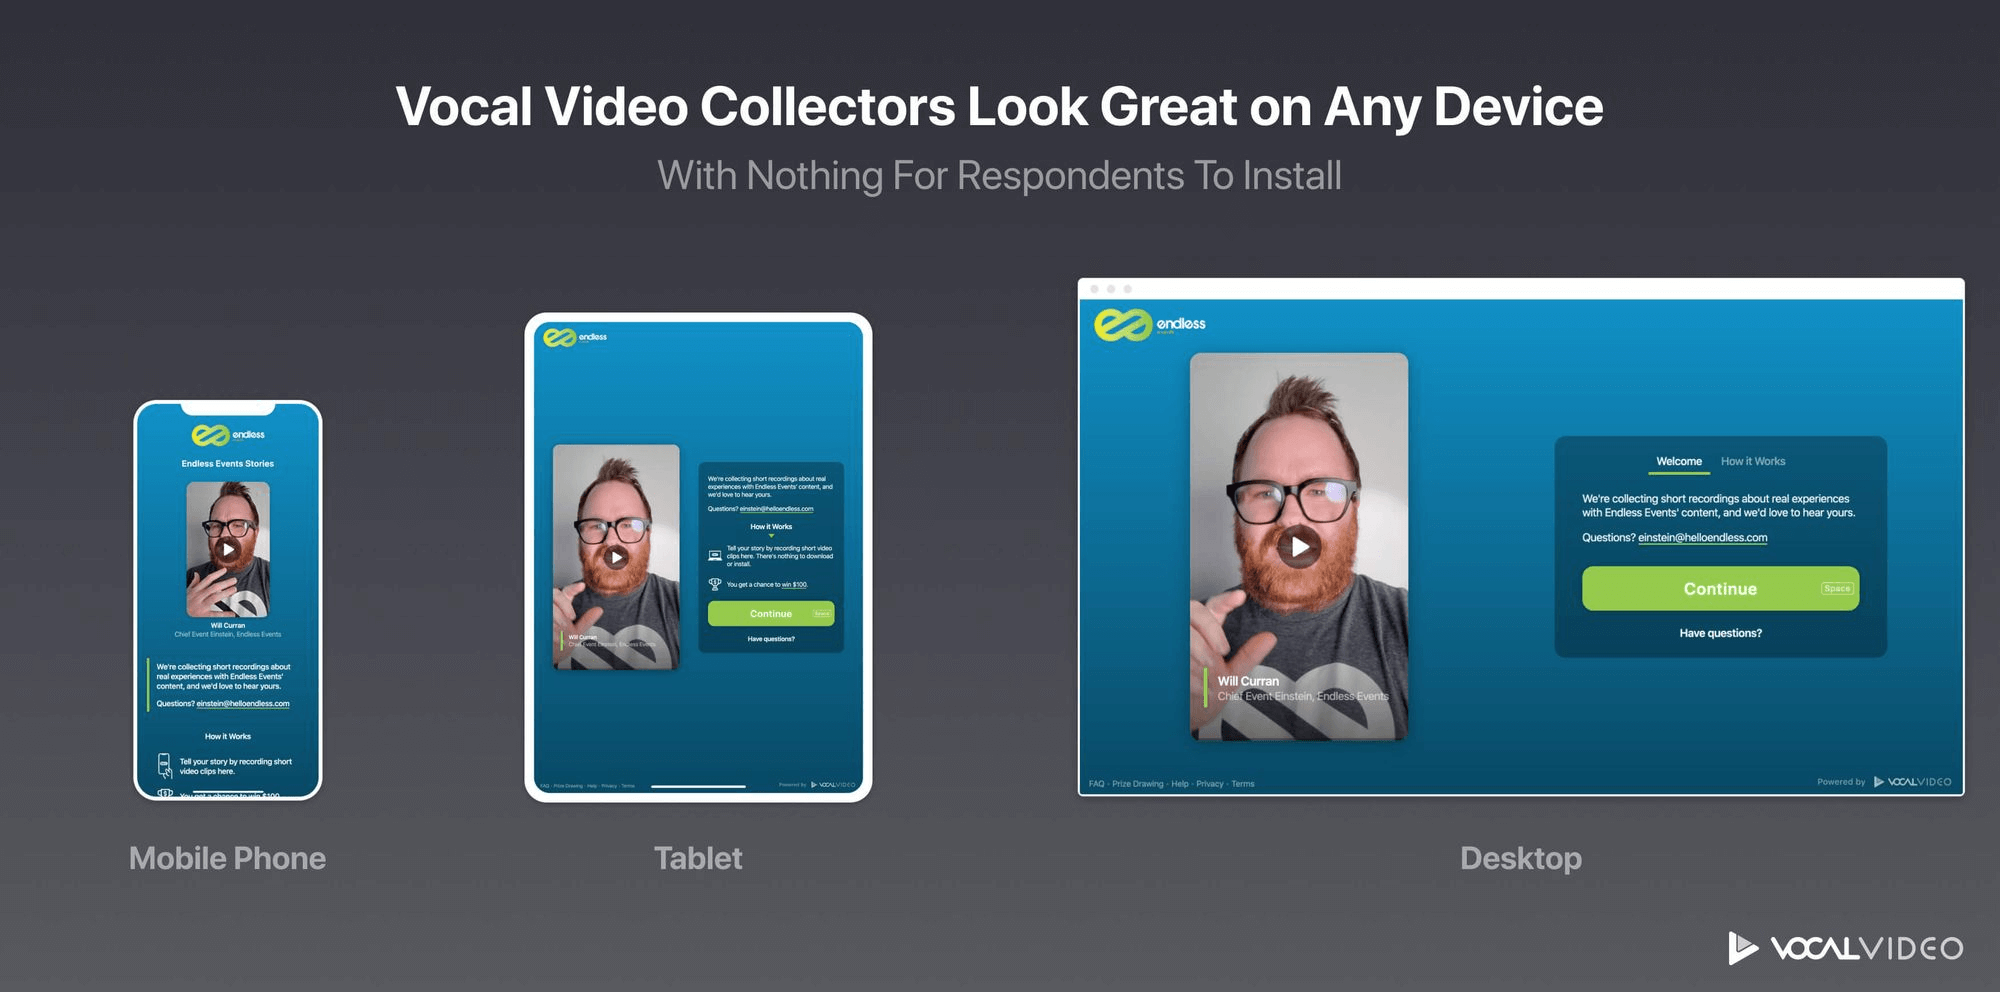 Vocal Video collectors look great on any device with nothing for respondents to install.